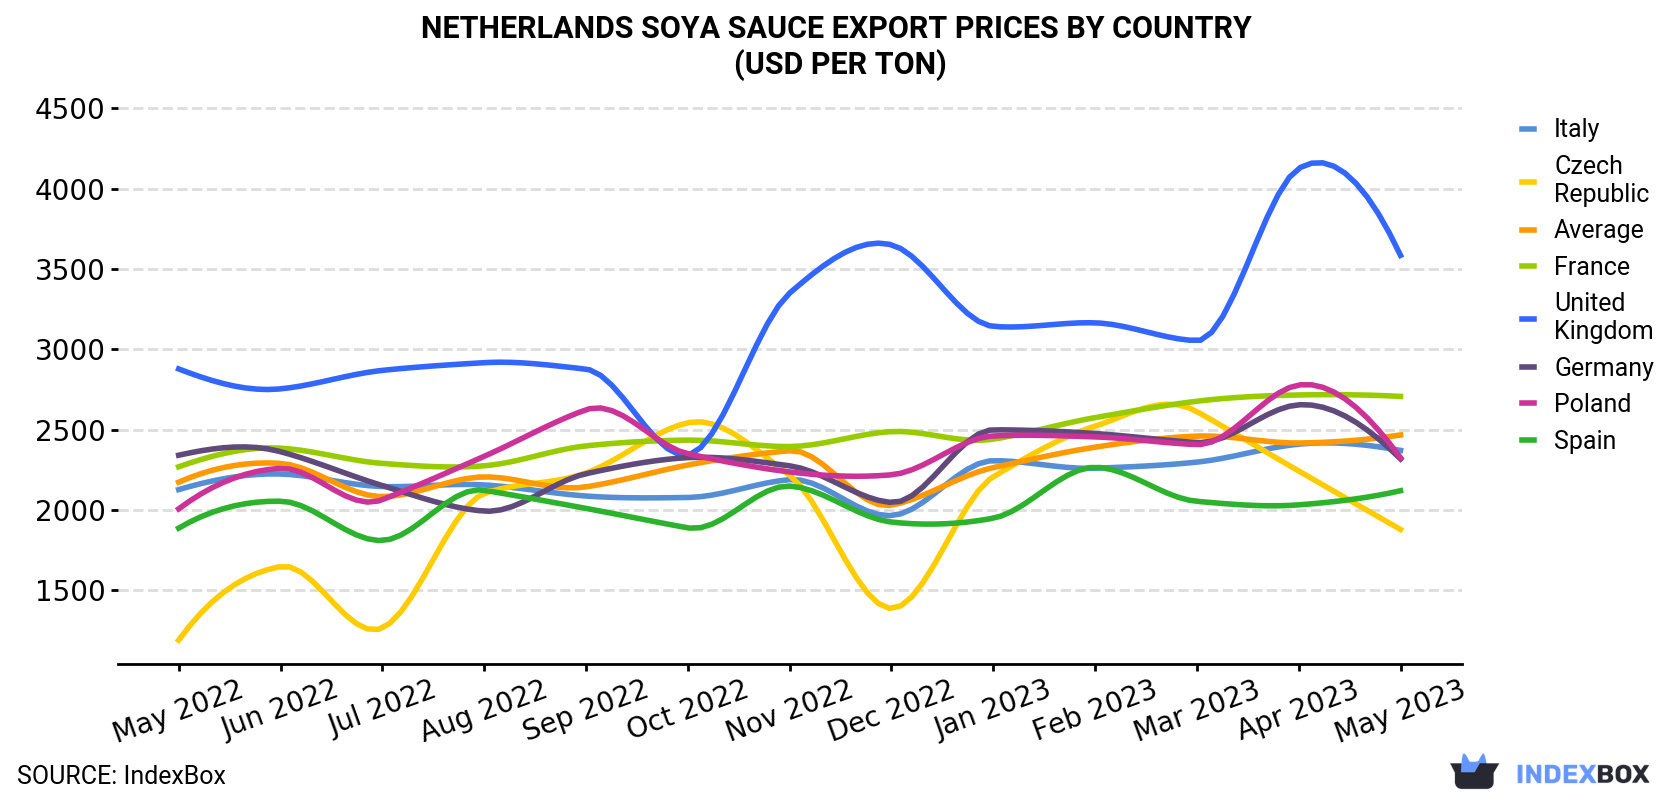 Netherlands Soya Sauce Export Prices By Country (USD Per Ton)